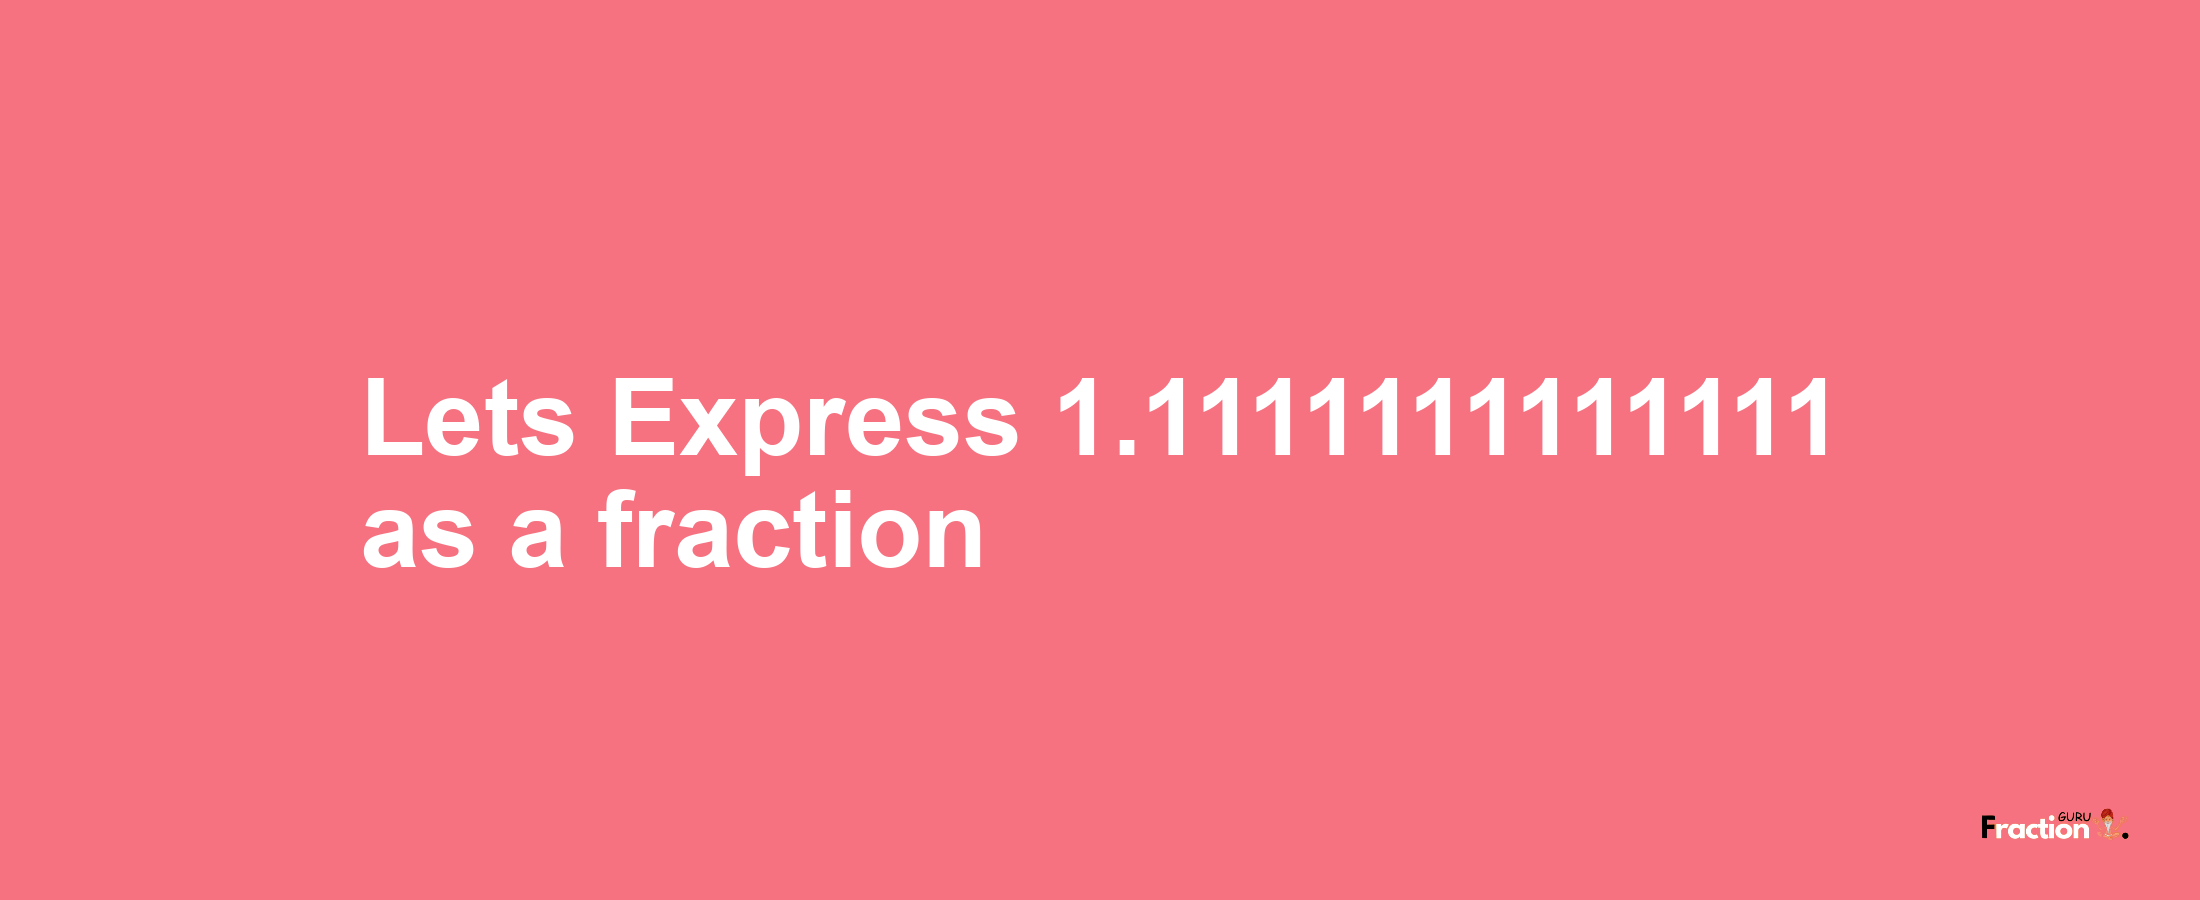 Lets Express 1.1111111111111 as afraction